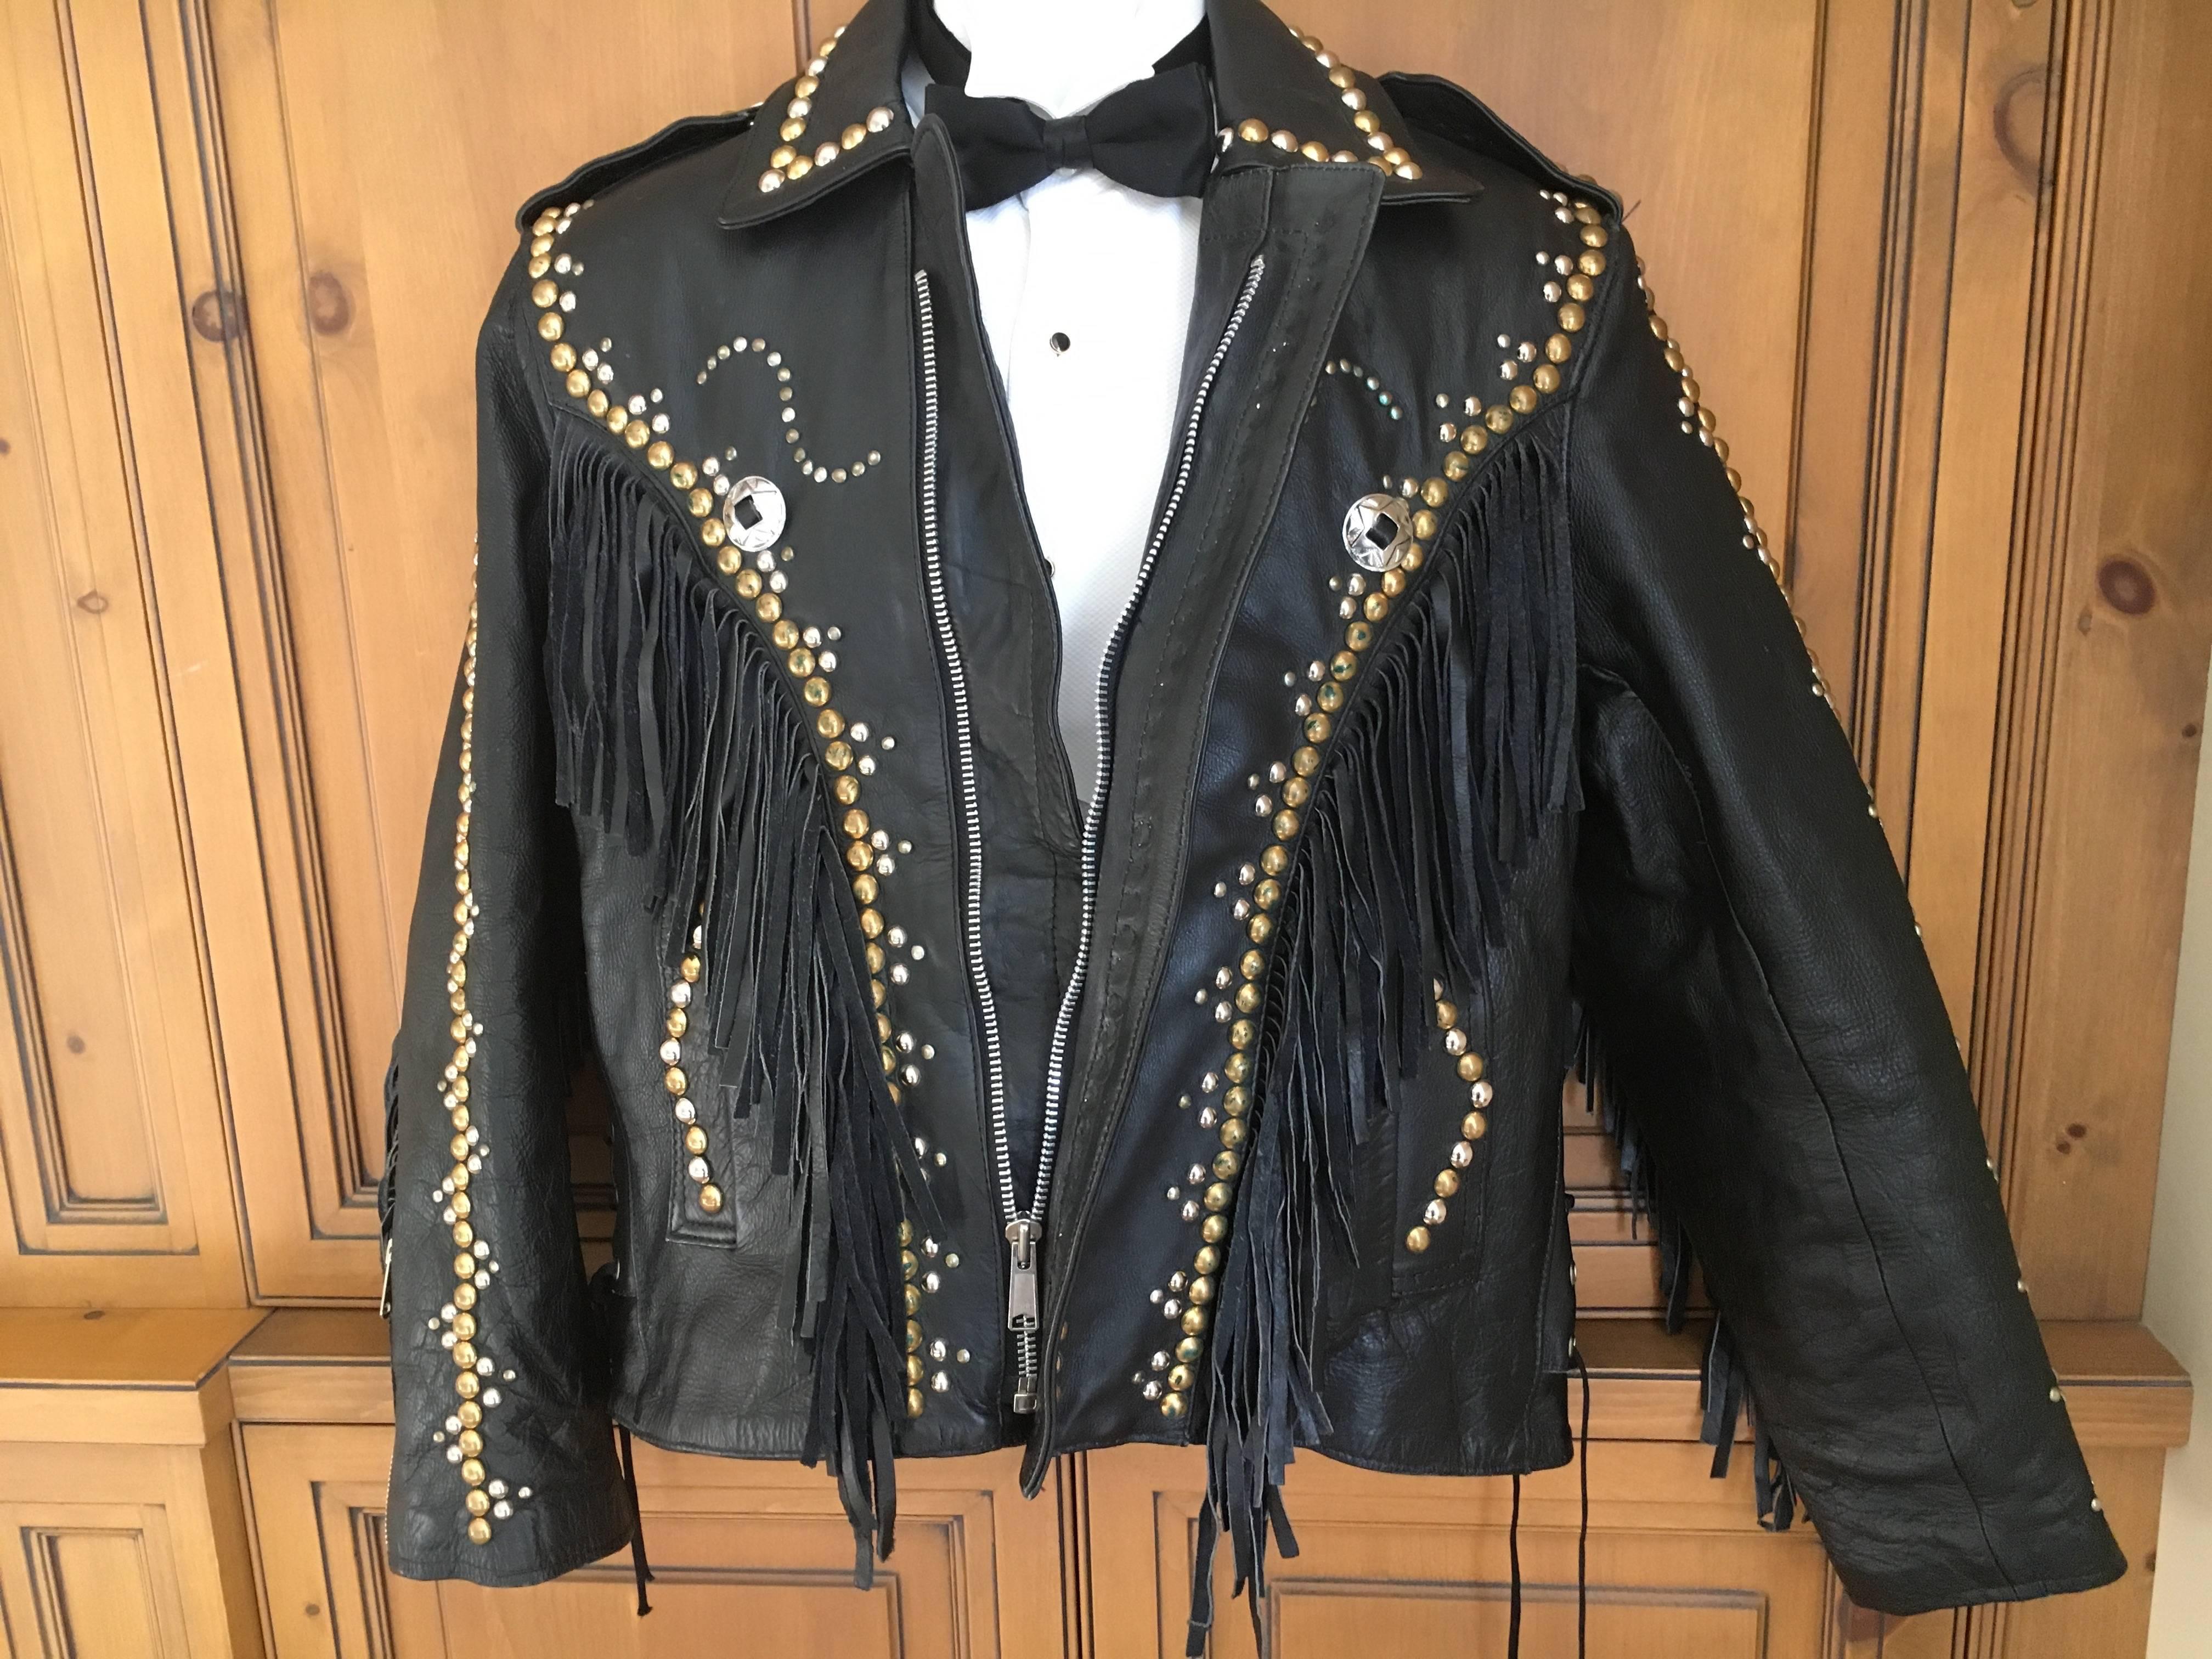 Amazing Vintage Men's Leather Motorcycle Jacket with Fringe and Studs.

Trimmed in Western style, this is from an old Rodeo family in Wyoming.

Size 42-44

  Appx Measurements 

Chest 46" Sleeve 25" Length 26" Across shoulders